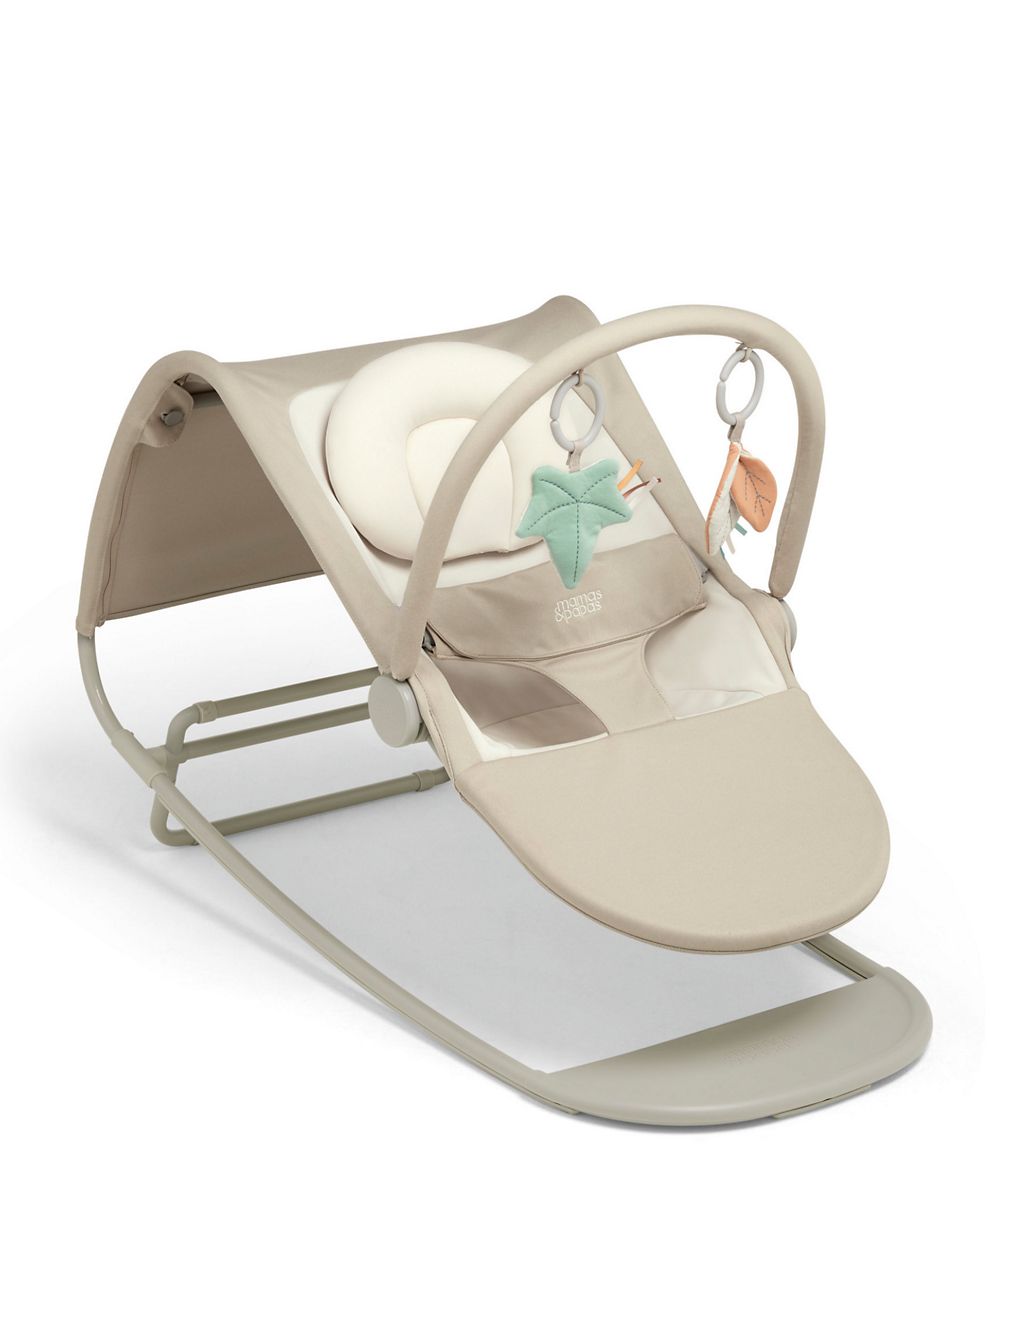 Tempo 3-in-1 Rocker Ivy Bouncer 8 of 9